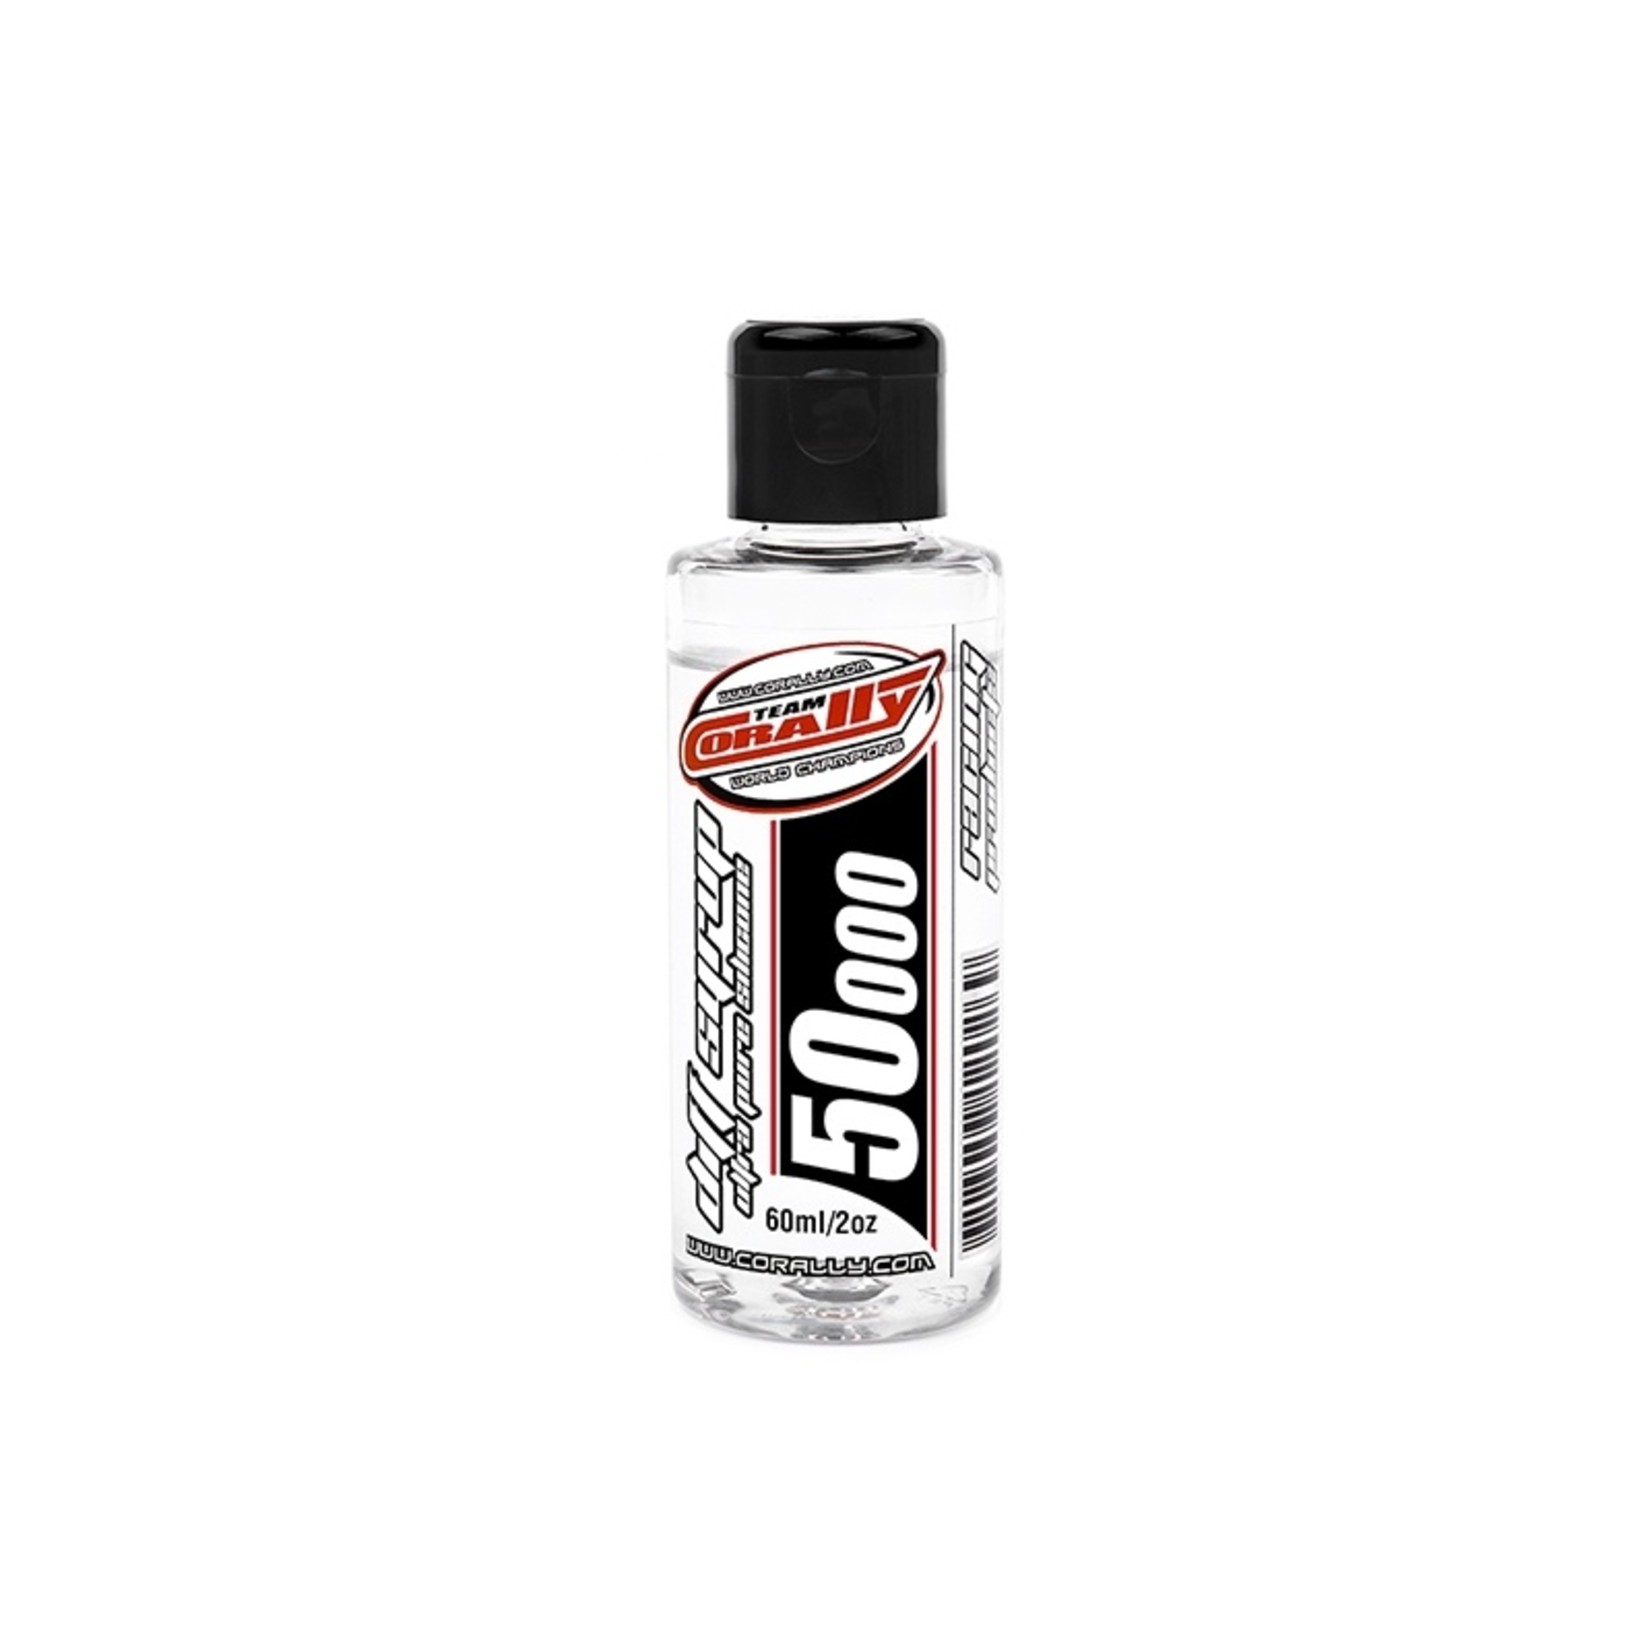 Corally (Team Corally) Ultra Pure Silicone Diff Syrup - 50000 CPS - 60ml